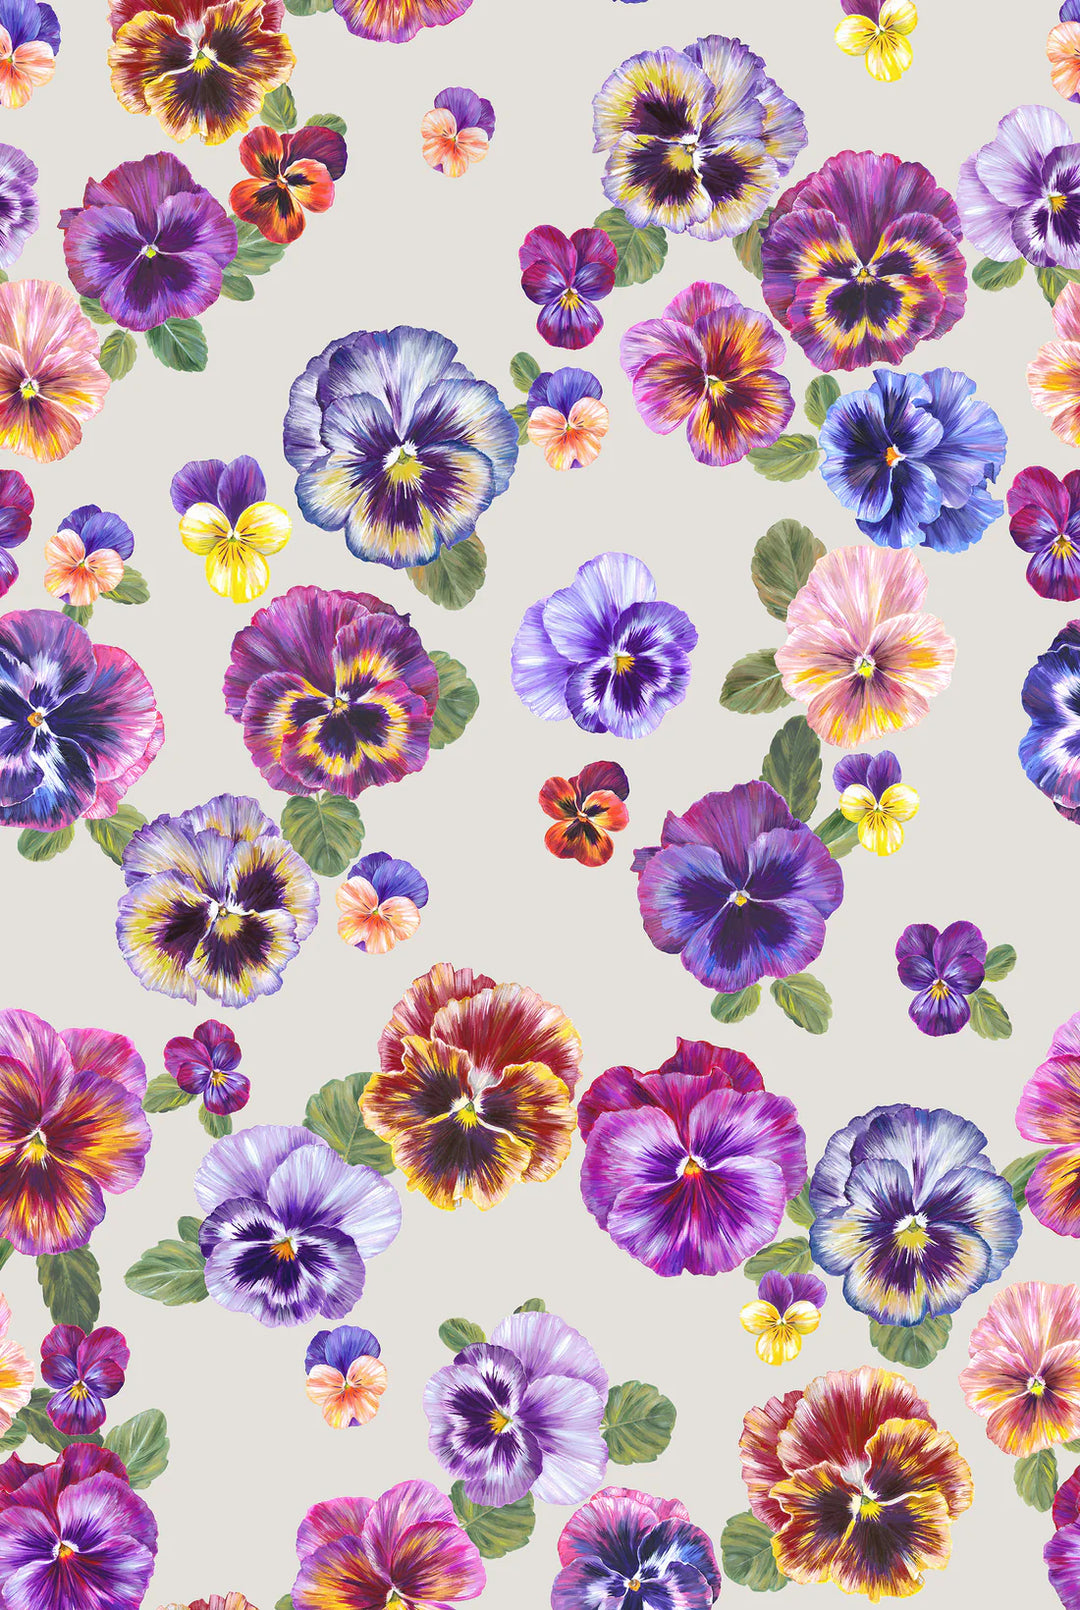 Victoria-Sanders-Plethora-of-pansies-hand-painted-details-pansies-in-parchment-off-white-background-wallpaper-floral-pattern